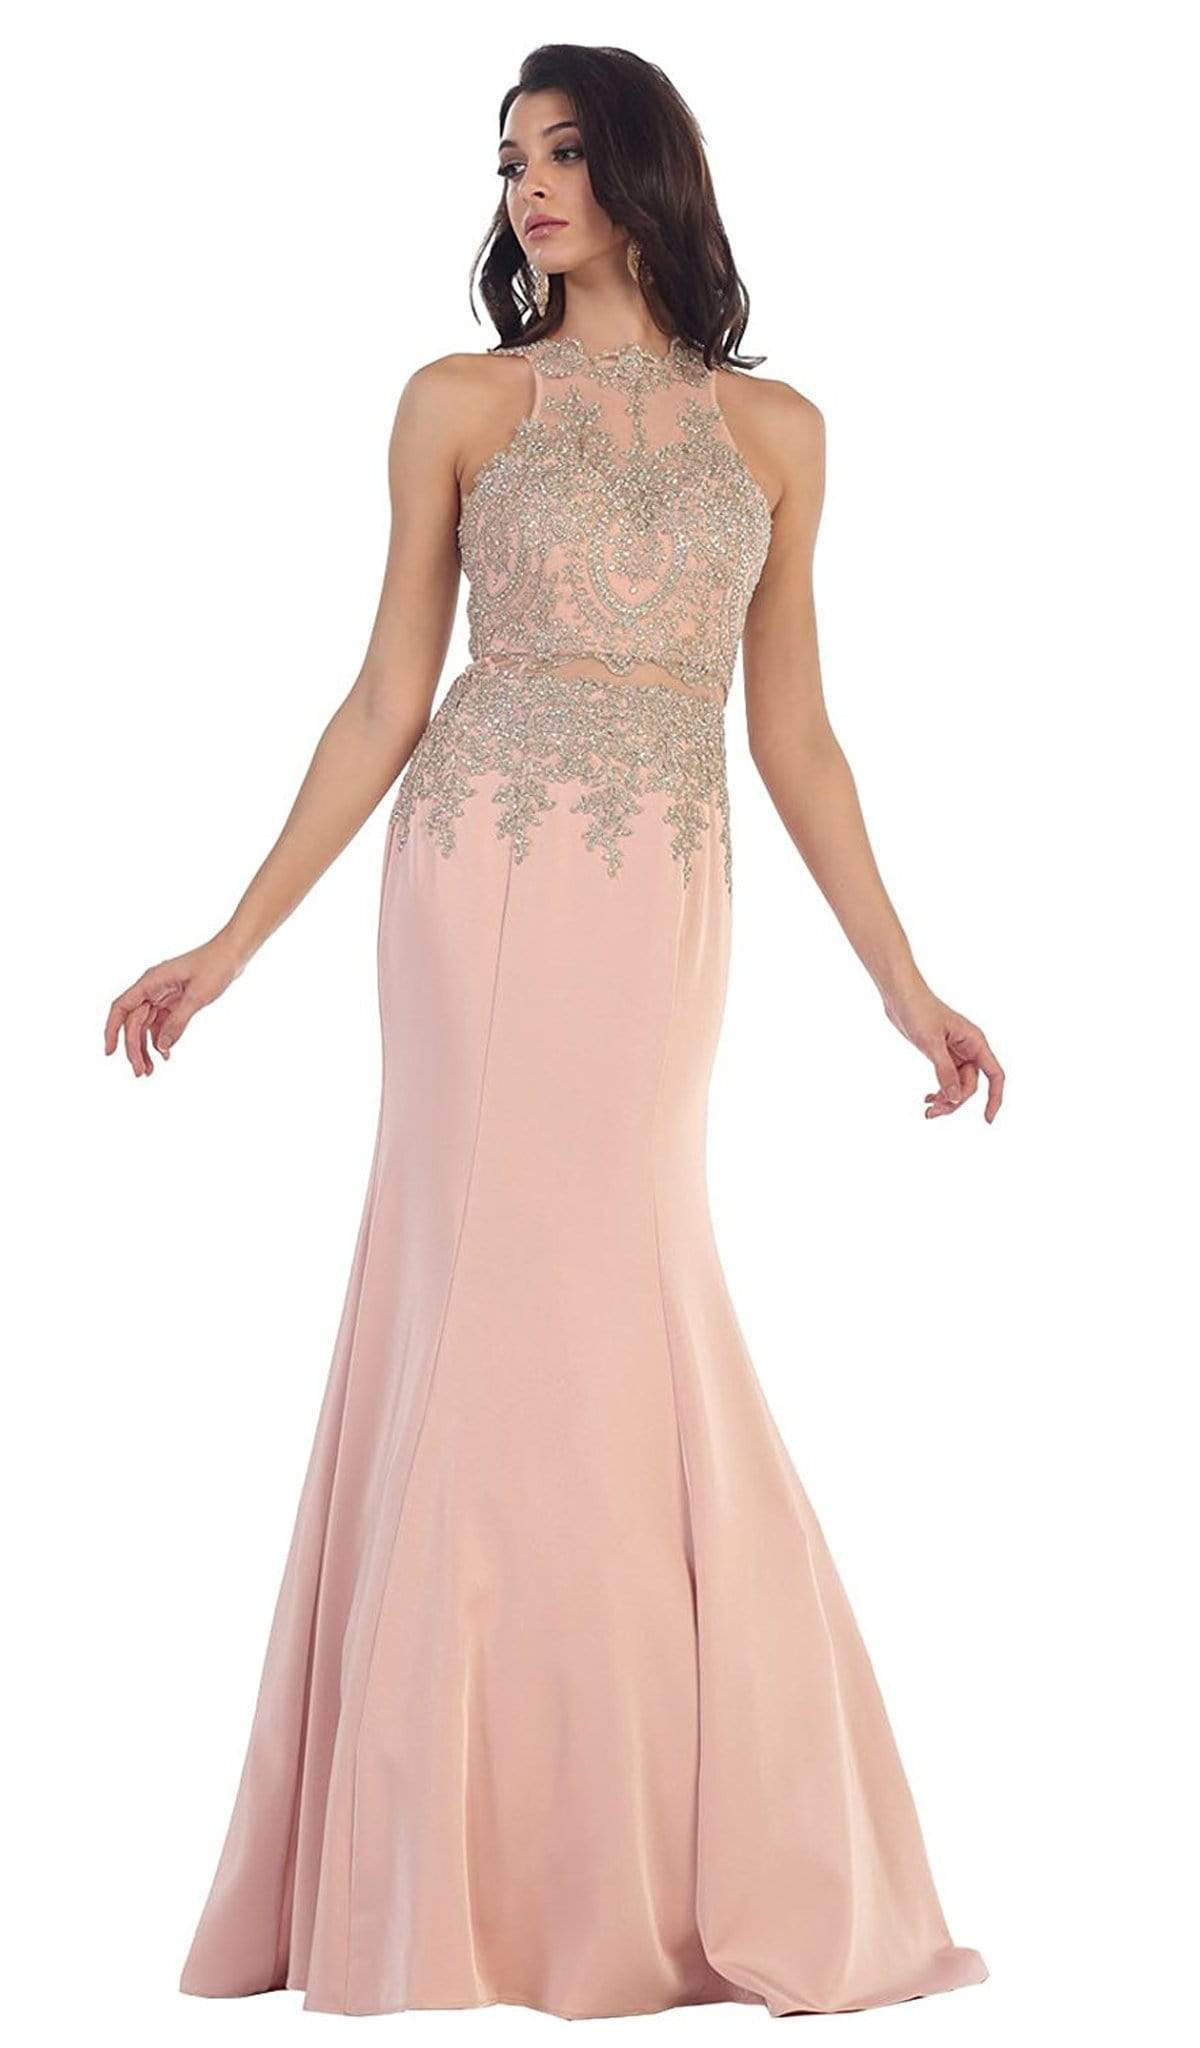 May Queen - Gilt Embroidered Illusion Trumpet Prom Gown Special Occasion Dress 2 / Dusty-Rose